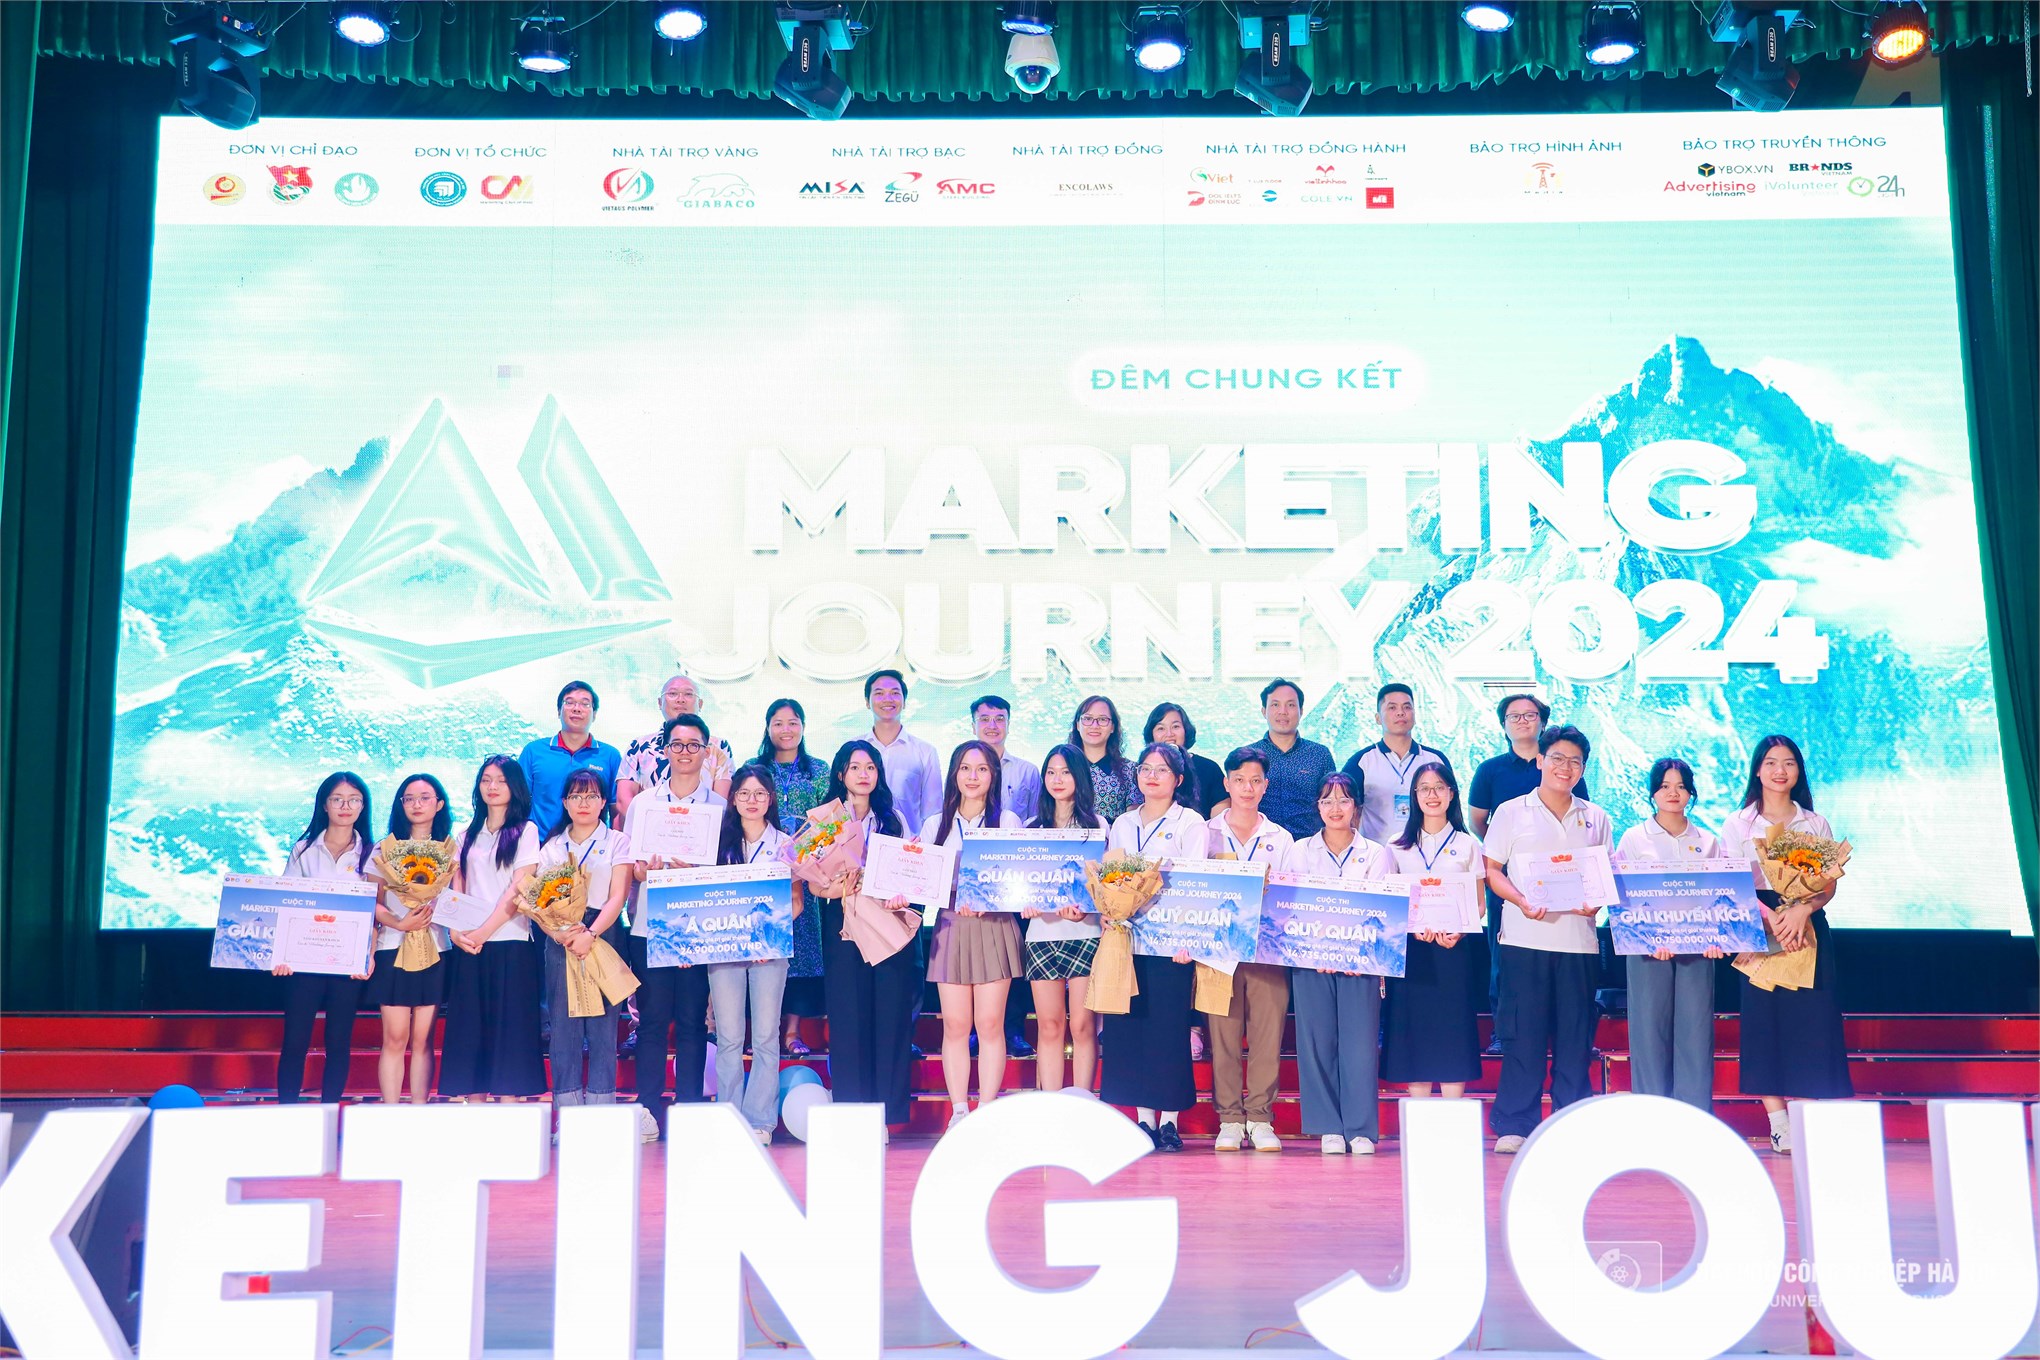 Marketing Journey 2024 Final: A Real-Life Playground for Talented Young Marketers